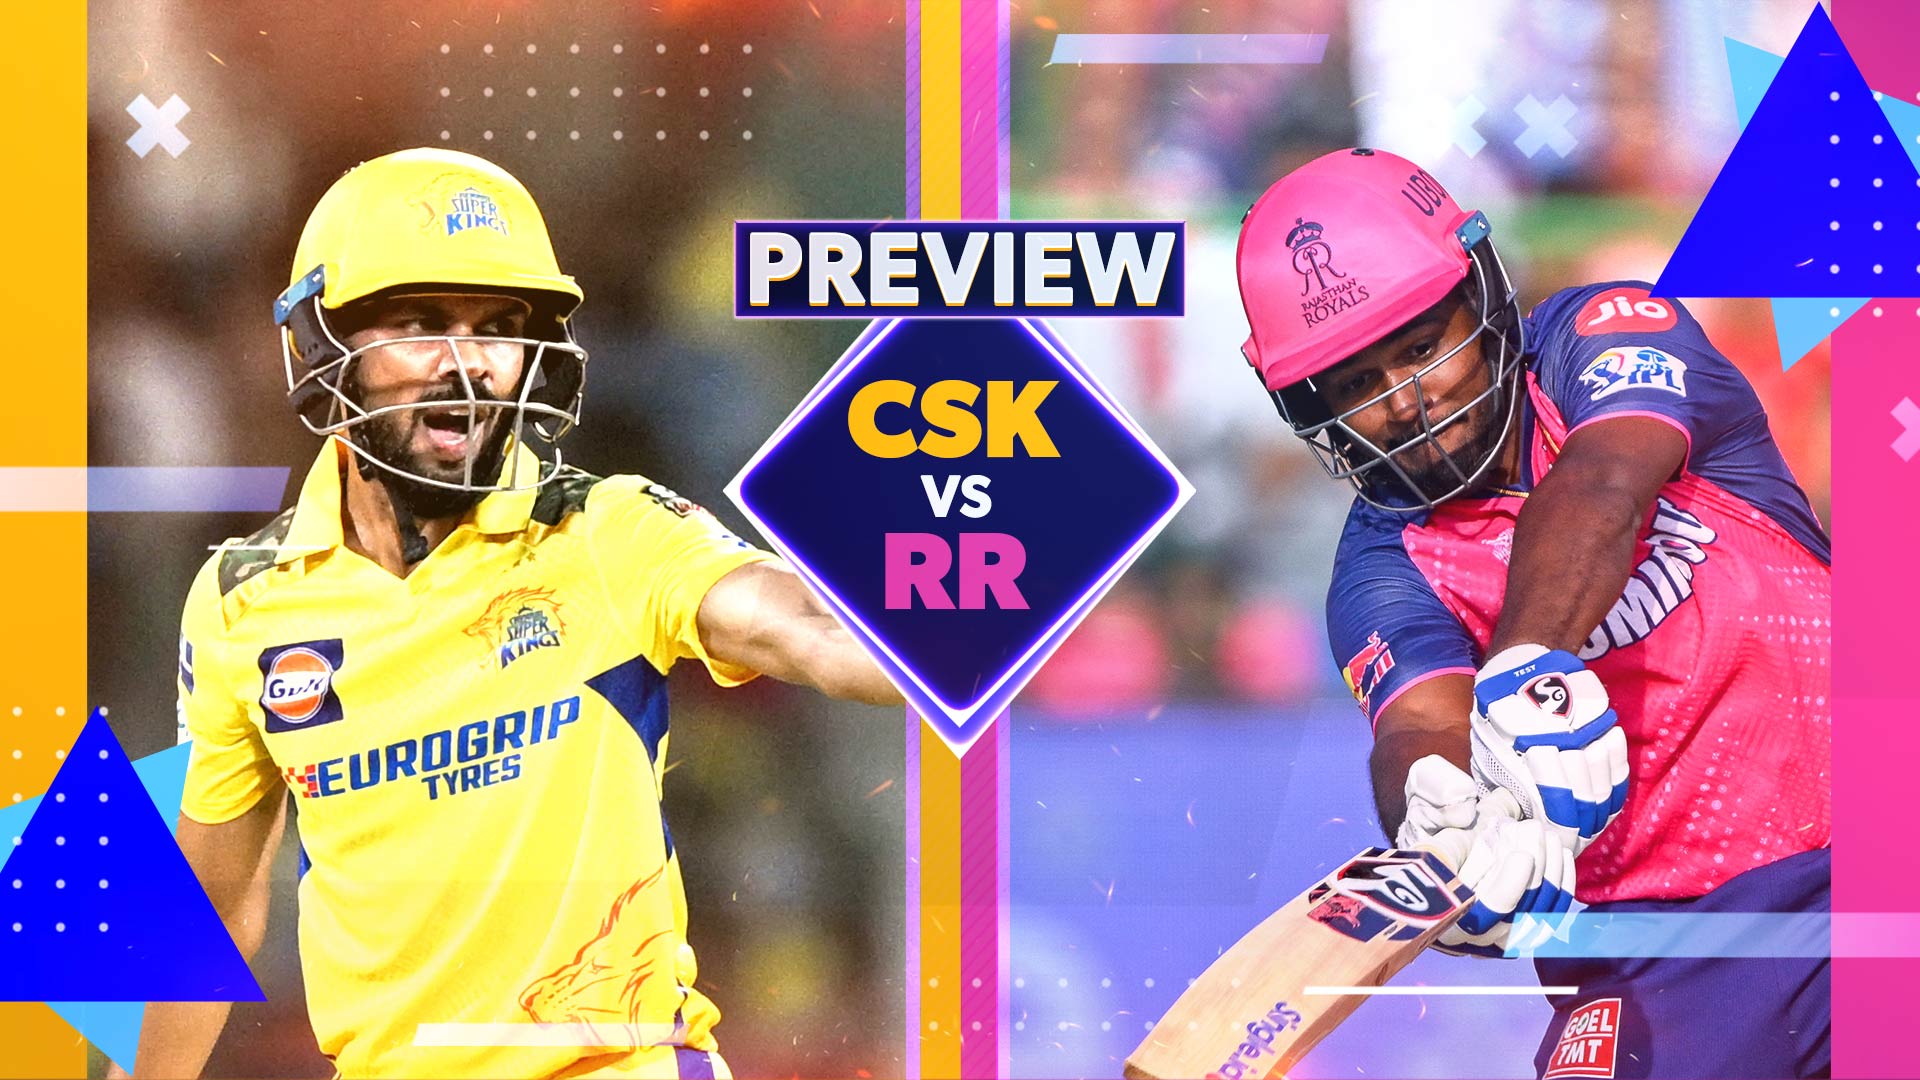 CSK vs RR: All You Need to Know